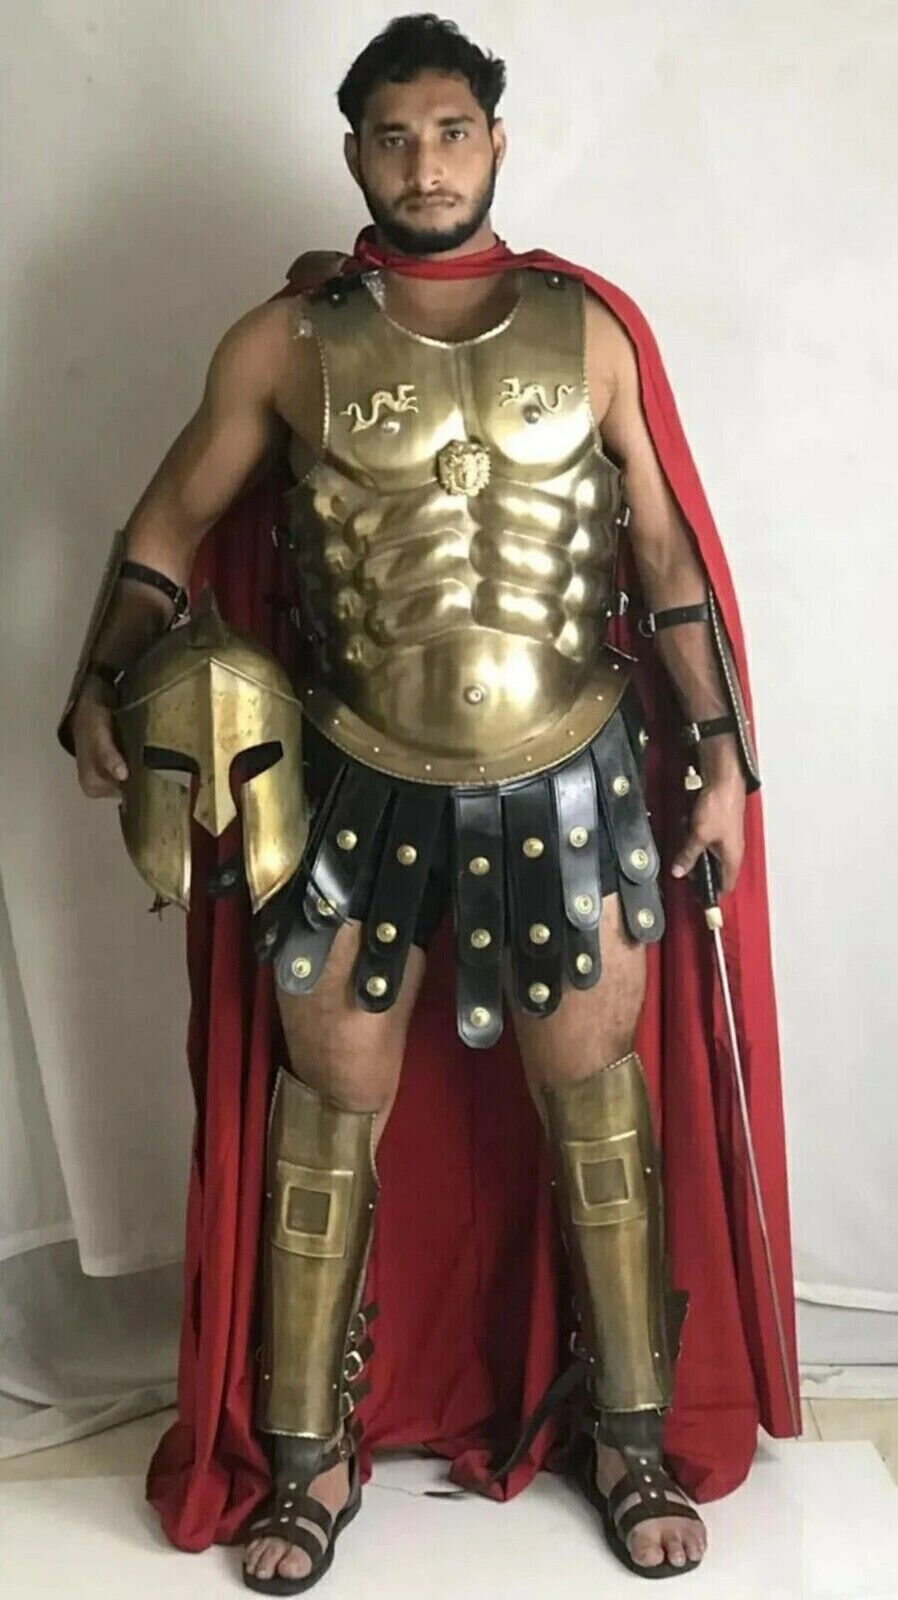 300 Movie Costume, King Spartan Costume, perfect Christmas gift collection